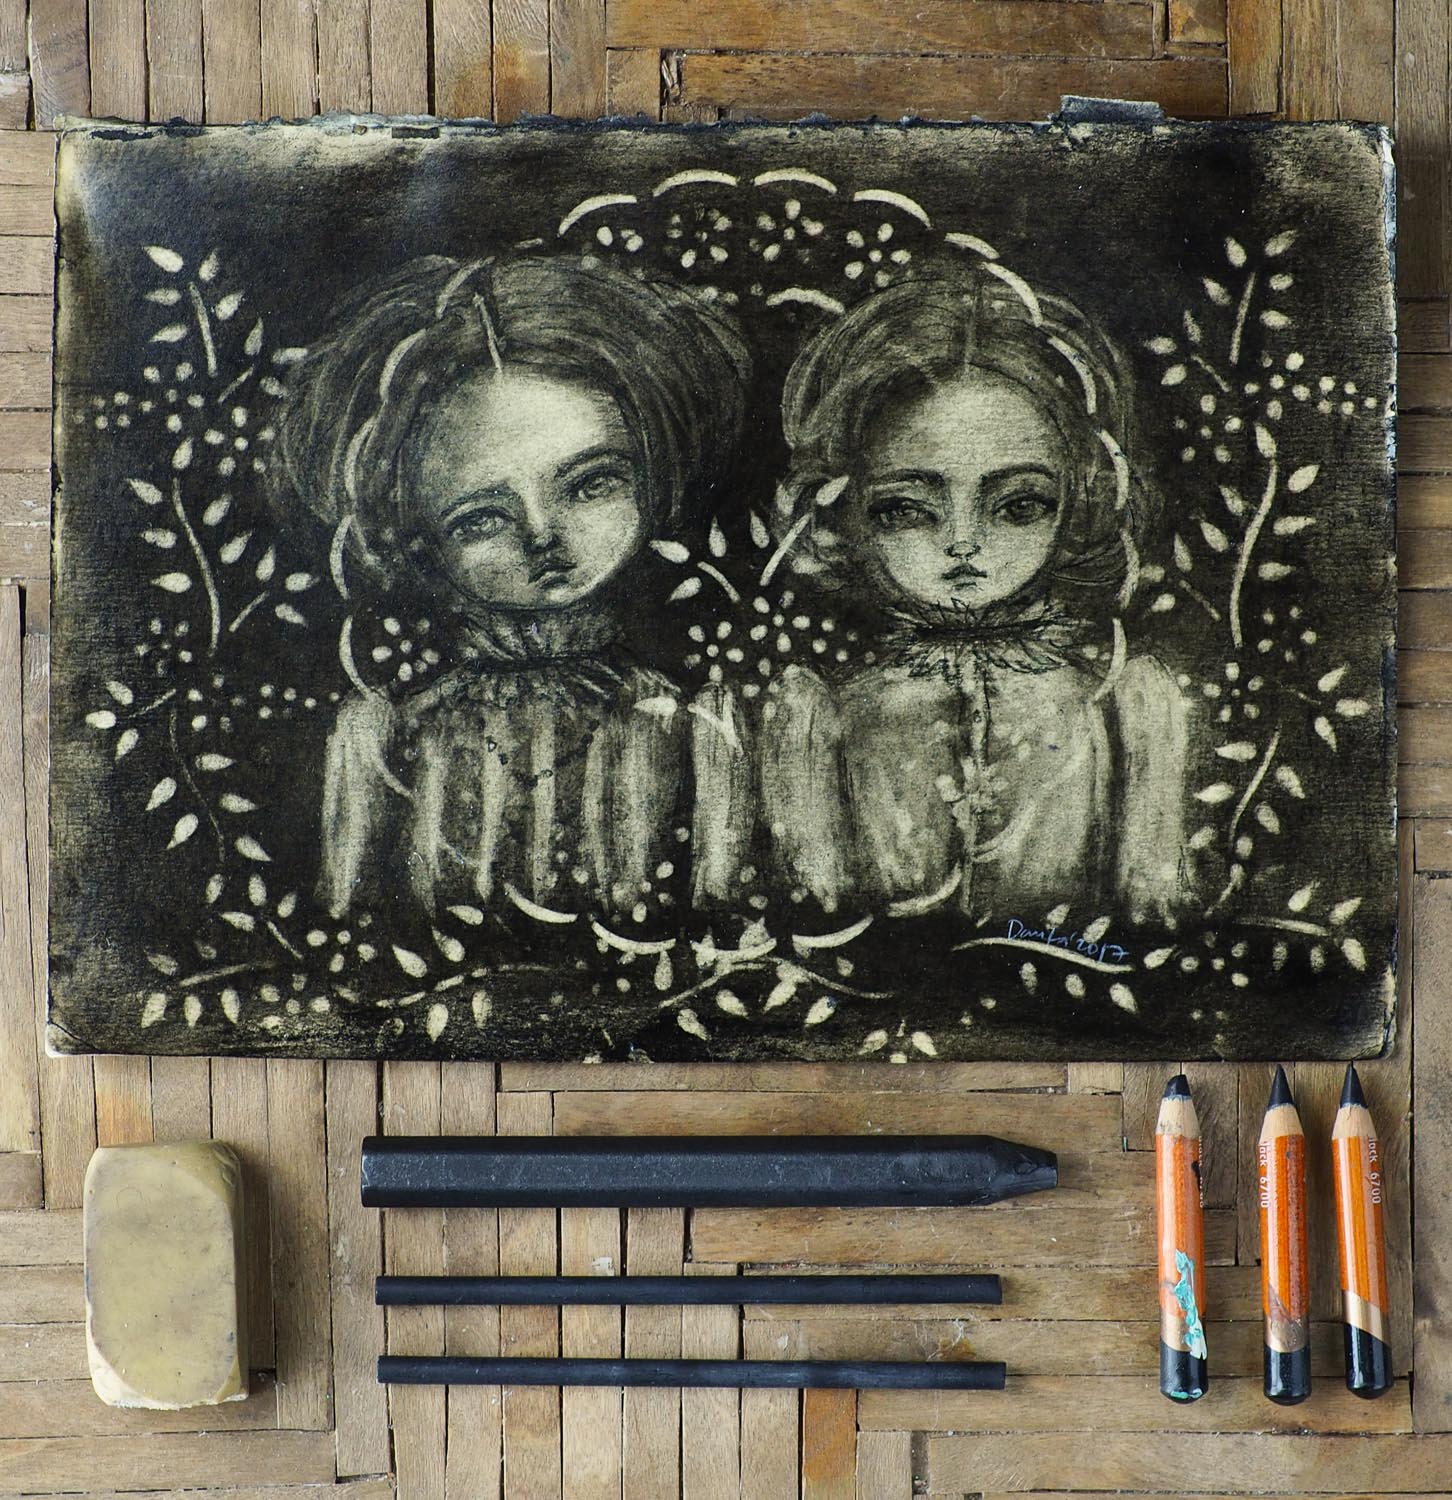 A beautiful drawing on a vintage book page by Danita Art. Created using charcoal and graphite pencils, dark pastels and graphite blocks. Mixed media original illustration.